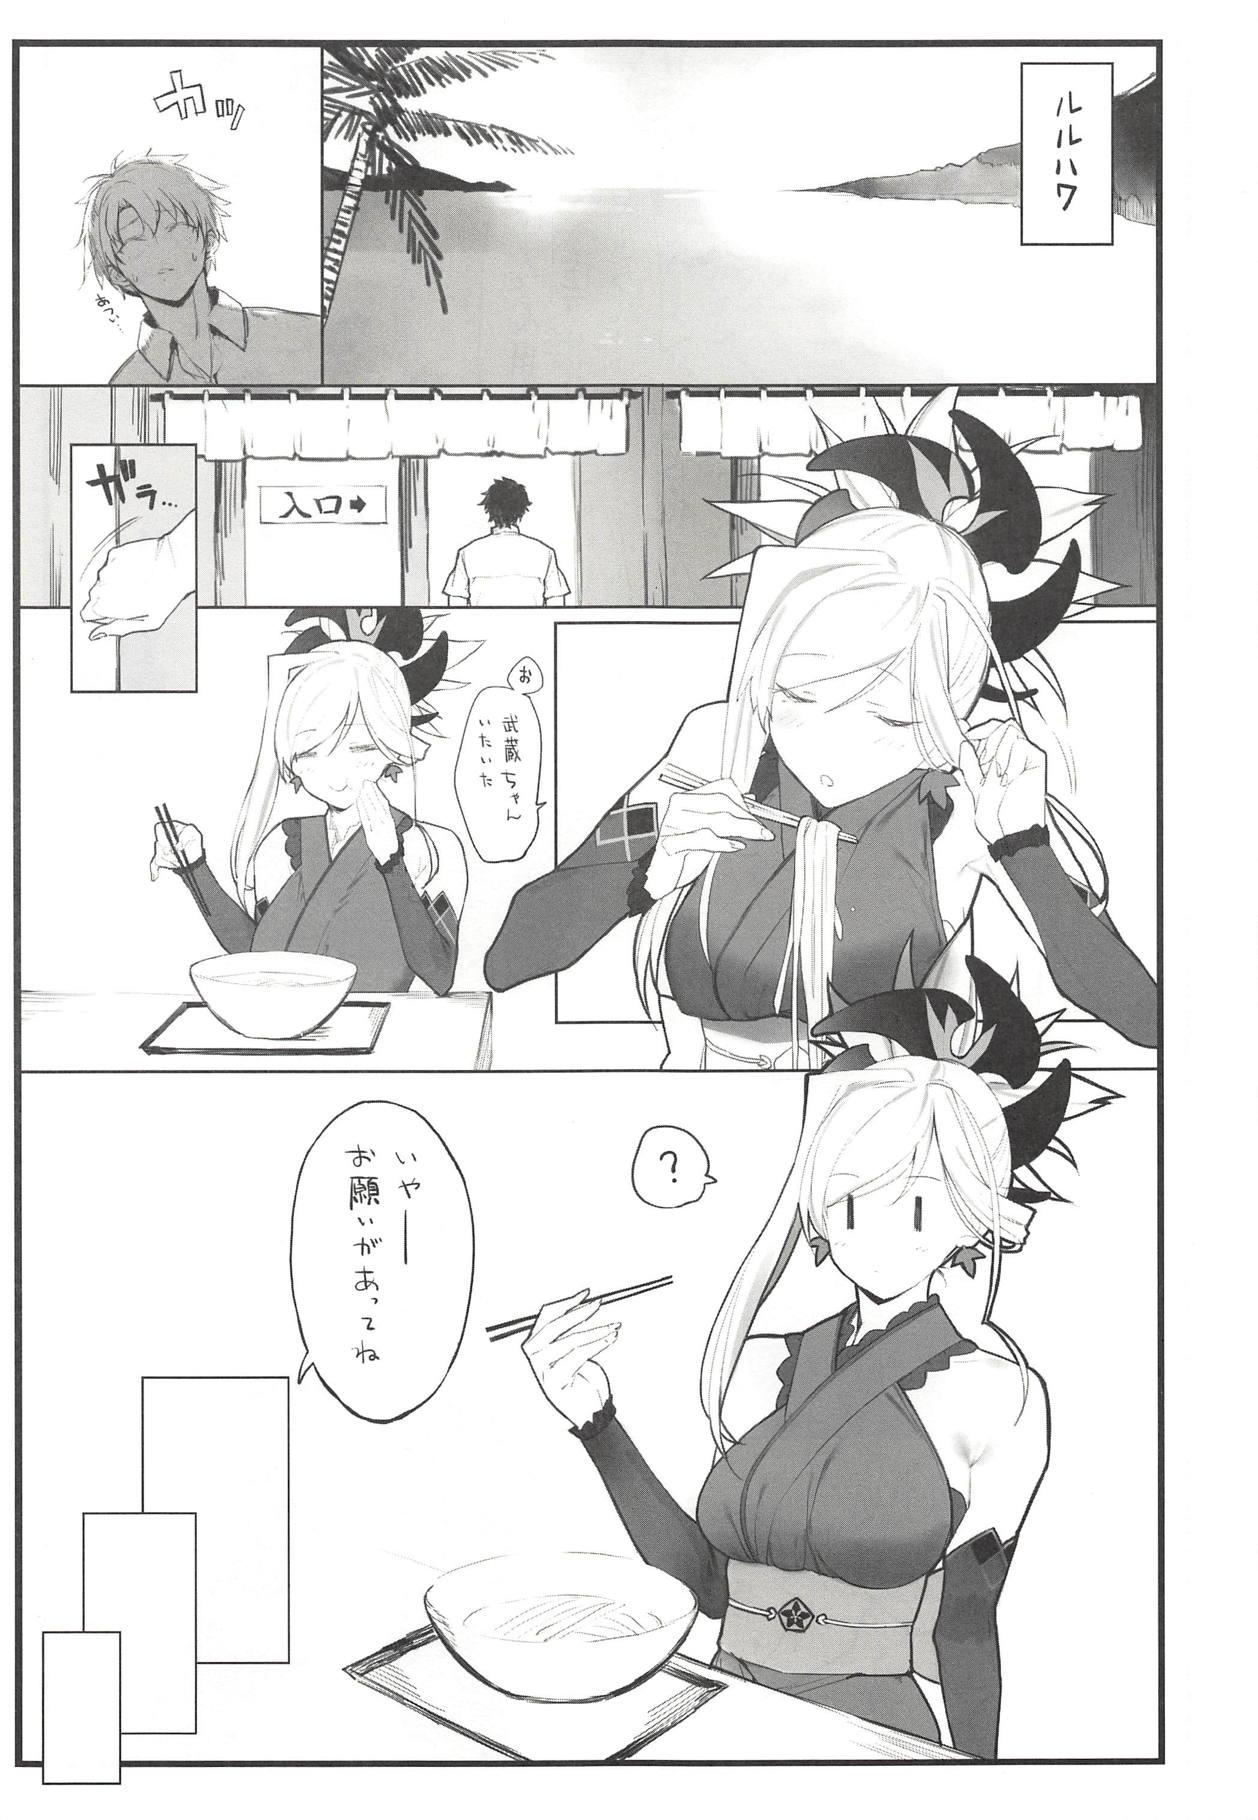 Sexcam Musashi-chan no Hon - Fate grand order Gay Group - Page 2